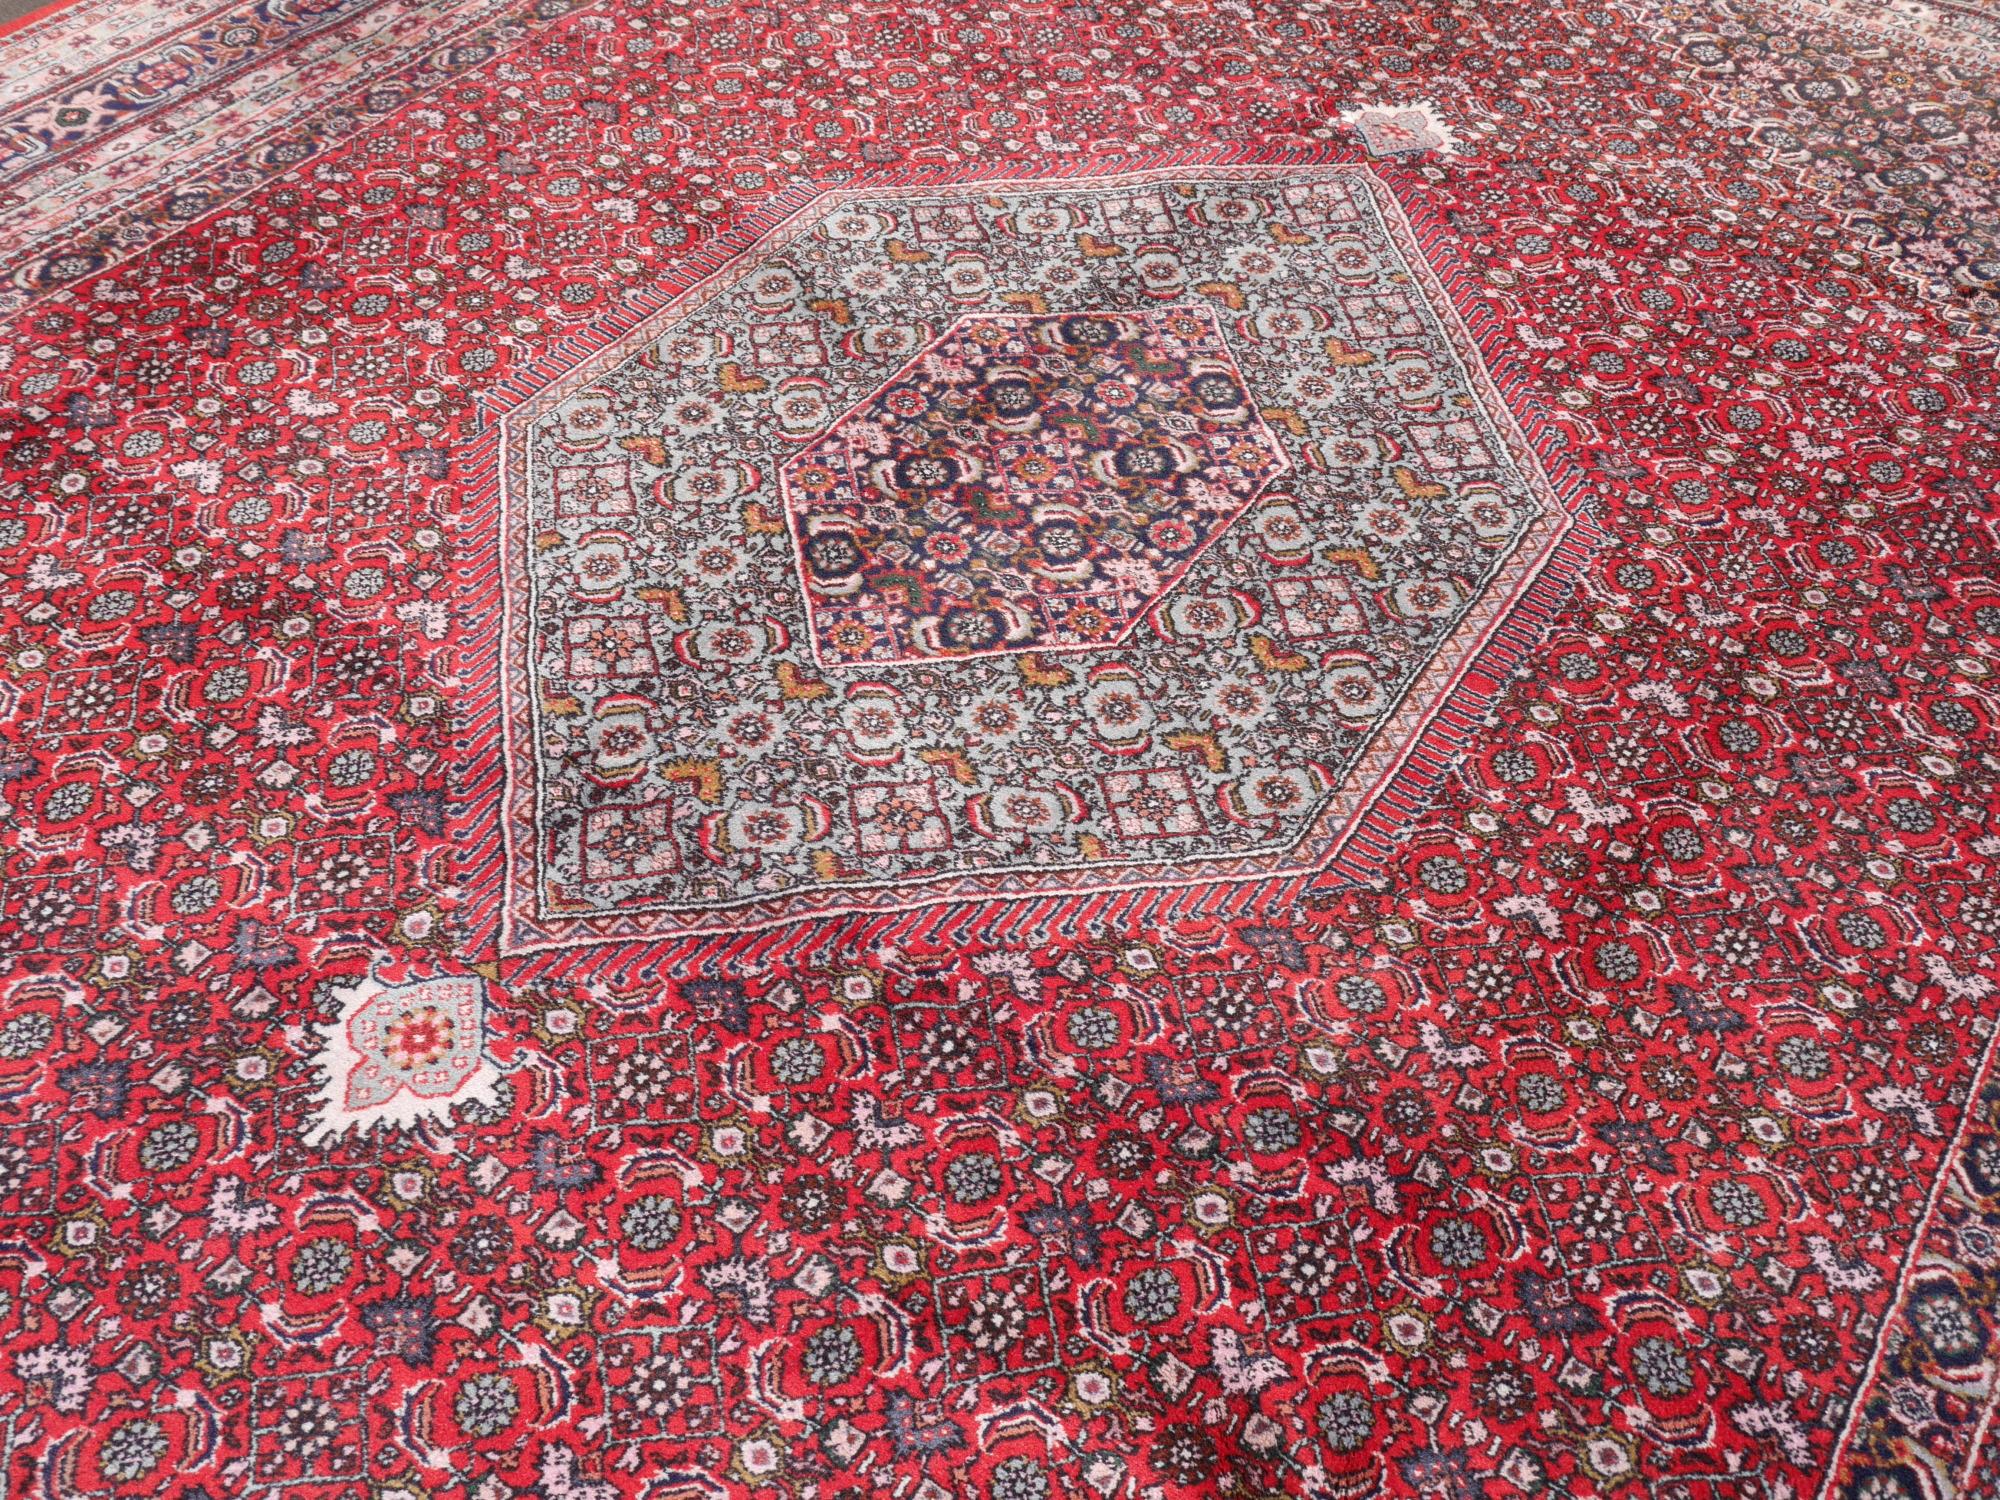 Bidjar Rug Oriental Vintage Hand-Knotted Persian Design Made in India In Good Condition For Sale In Lohr, Bavaria, DE